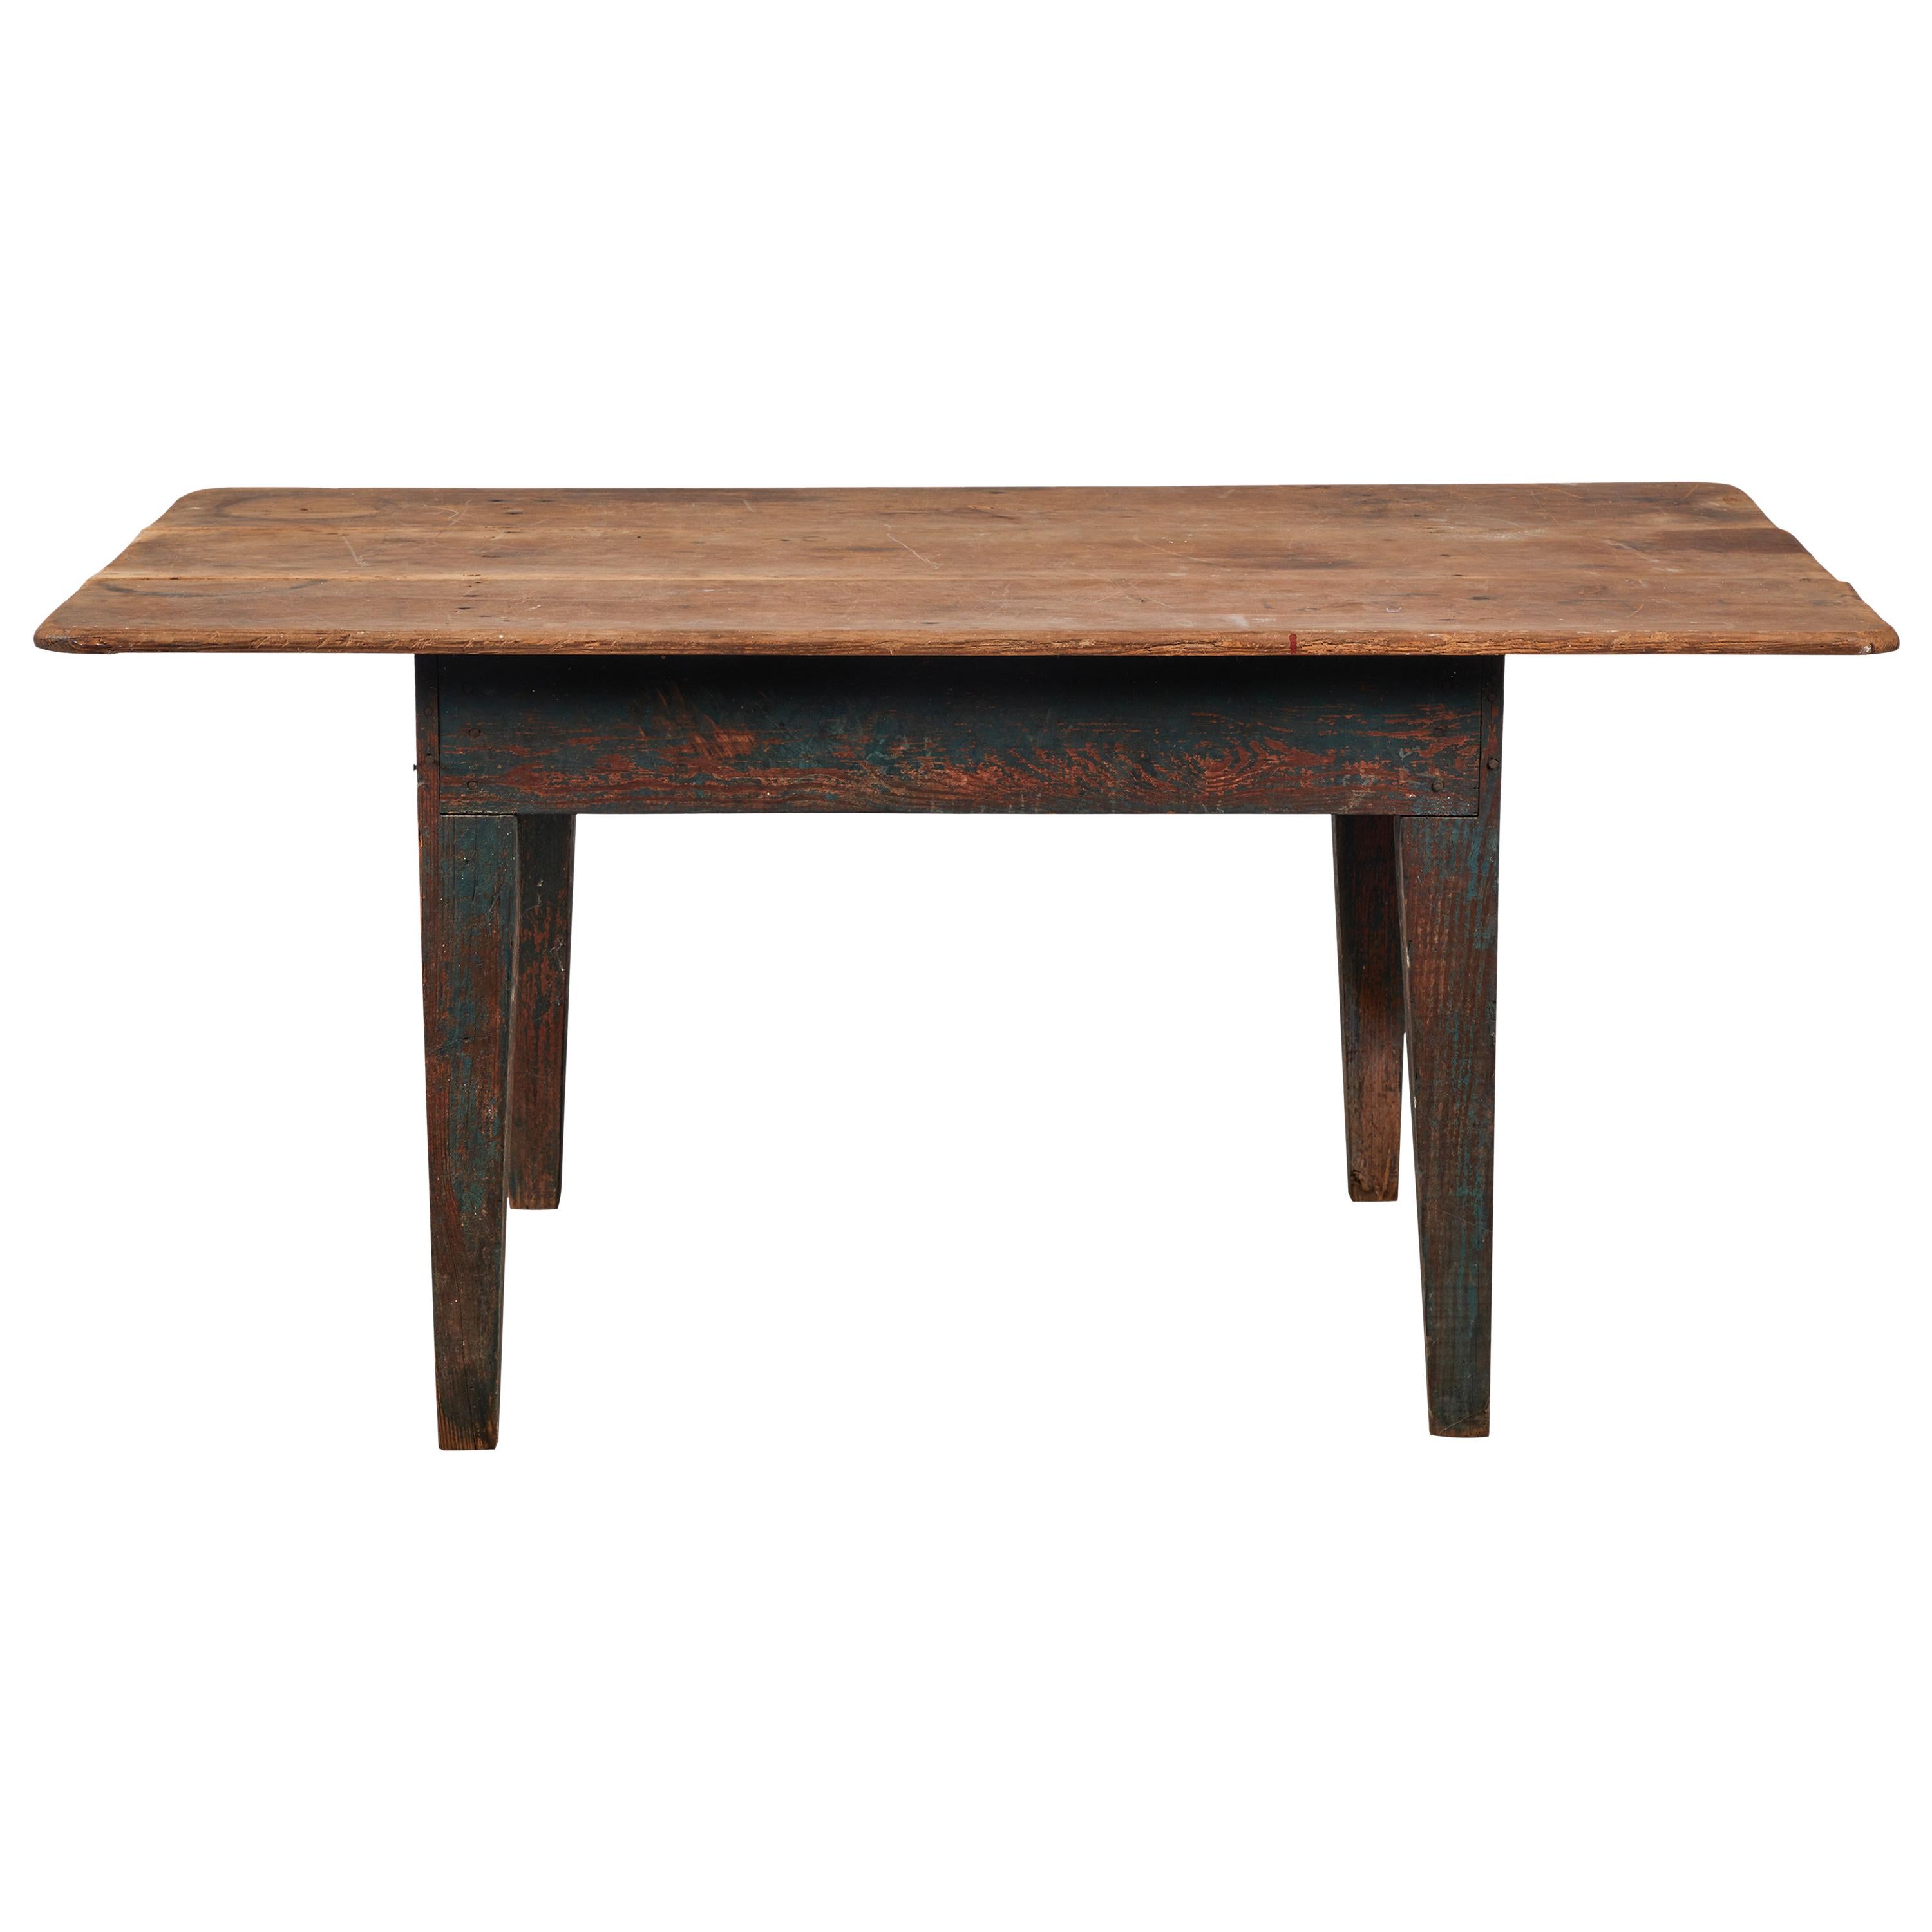 Early American Wooden Dining Table